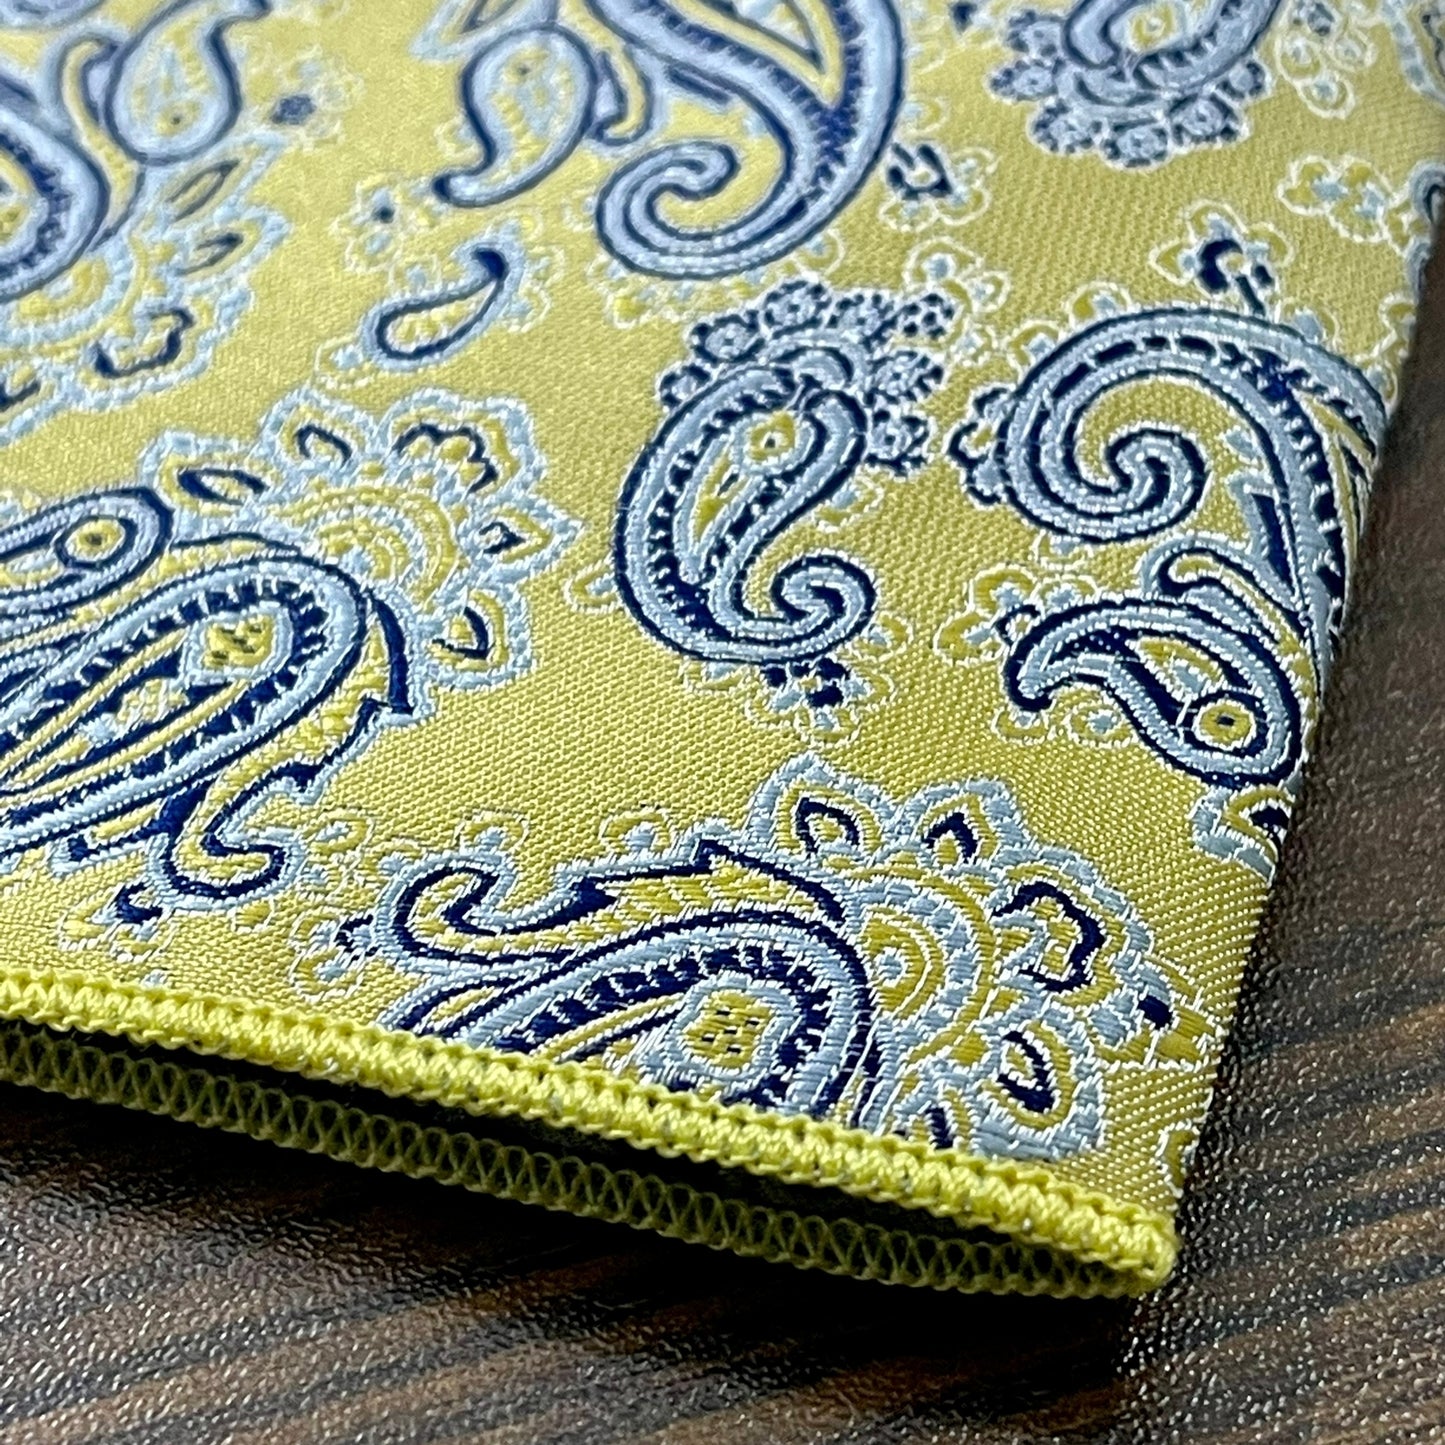 yellow and blue floral paisley pocket square for men in pakistan